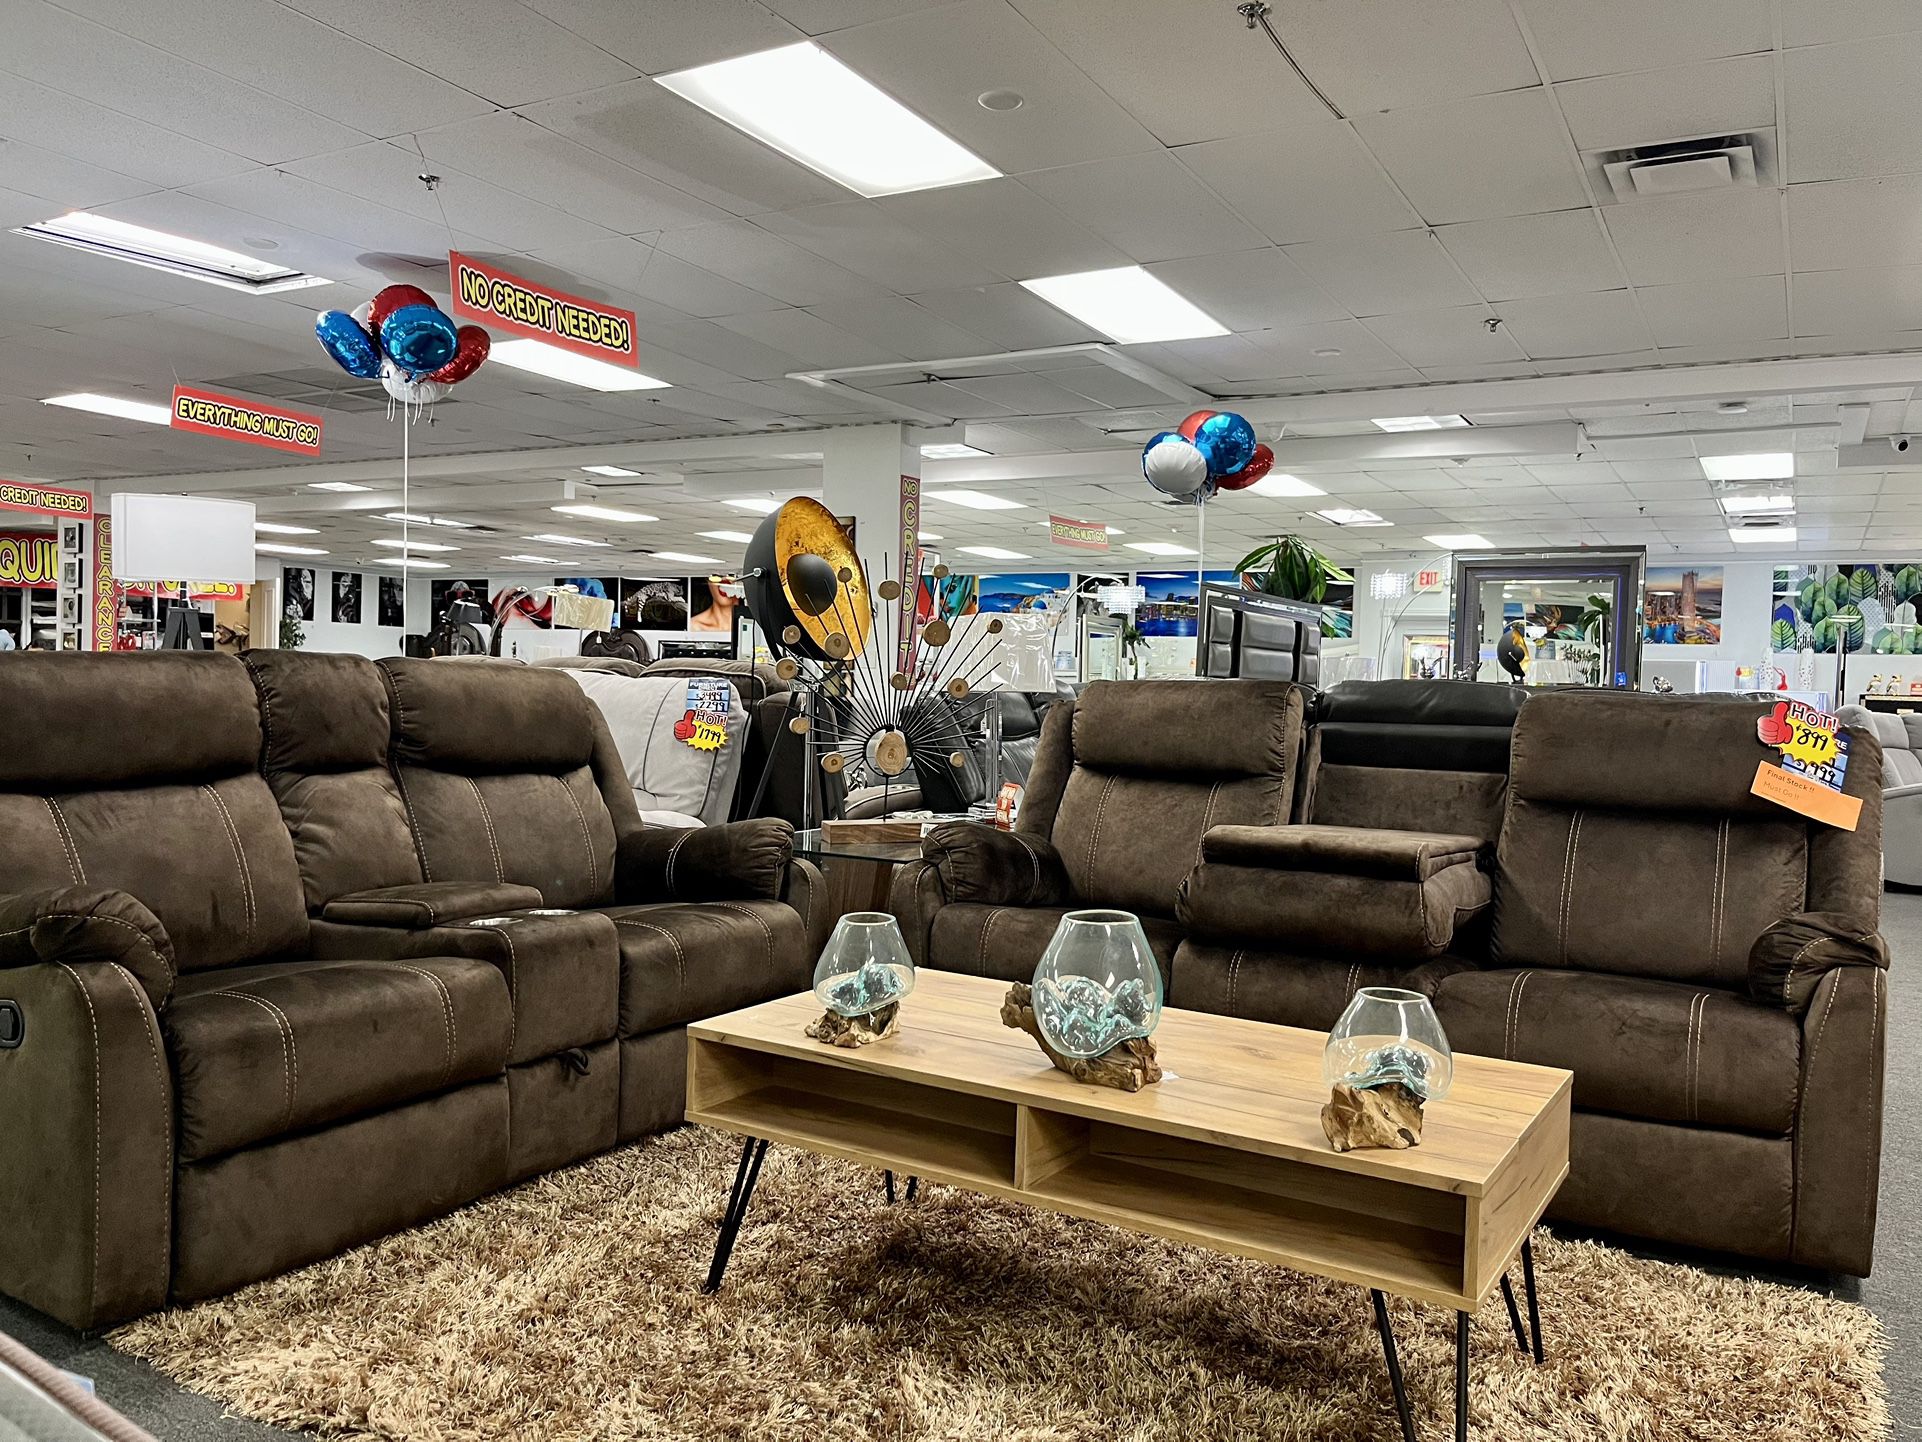 😱😱 Both Sets On Sale !! $899 & $999 For 2pc Sofa & Love Seat !! 